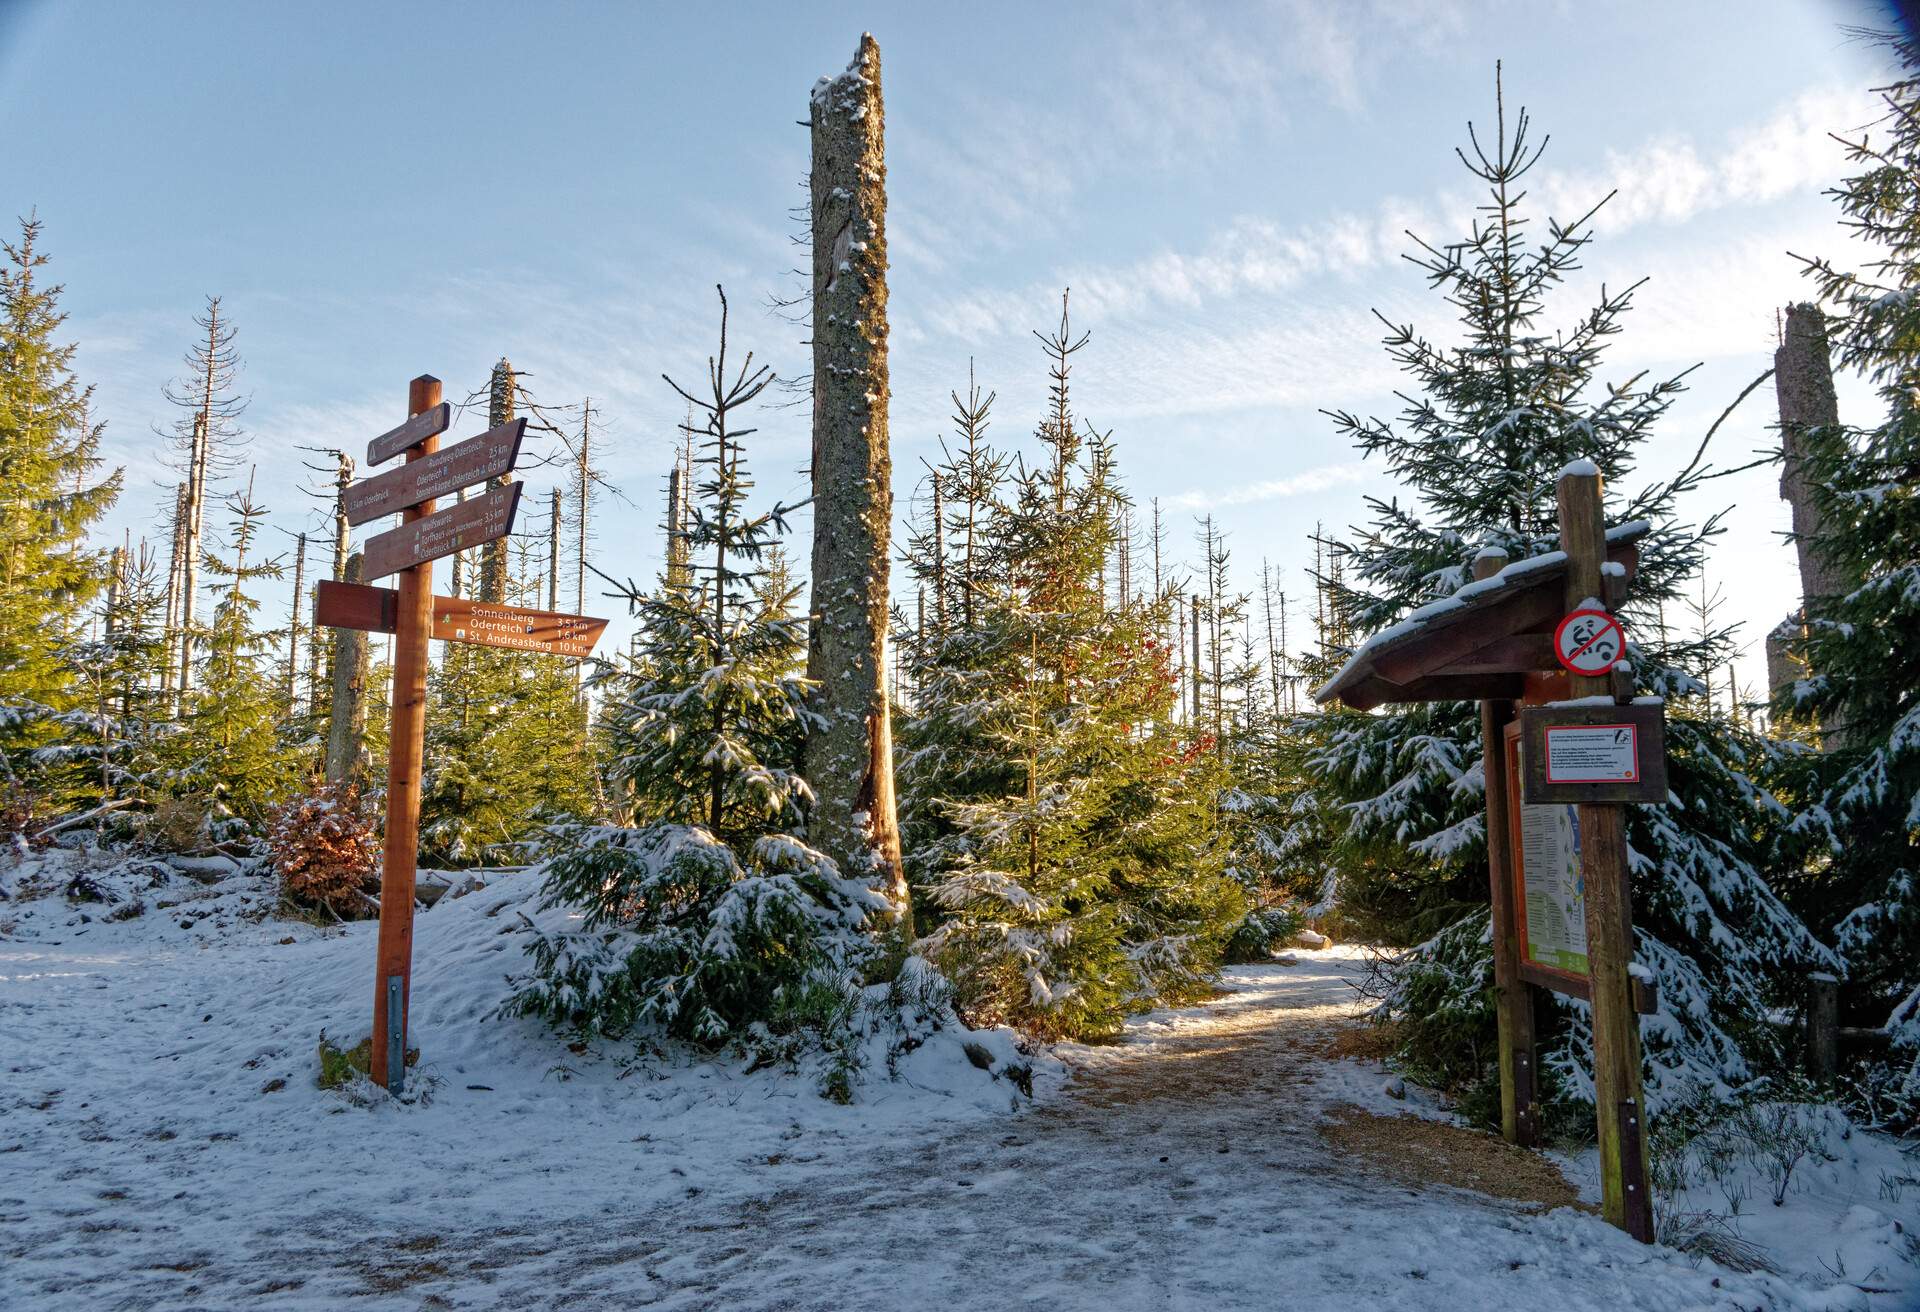 Road signs on a wooden post next to a snag surrounded by trees in a snow-covered village.